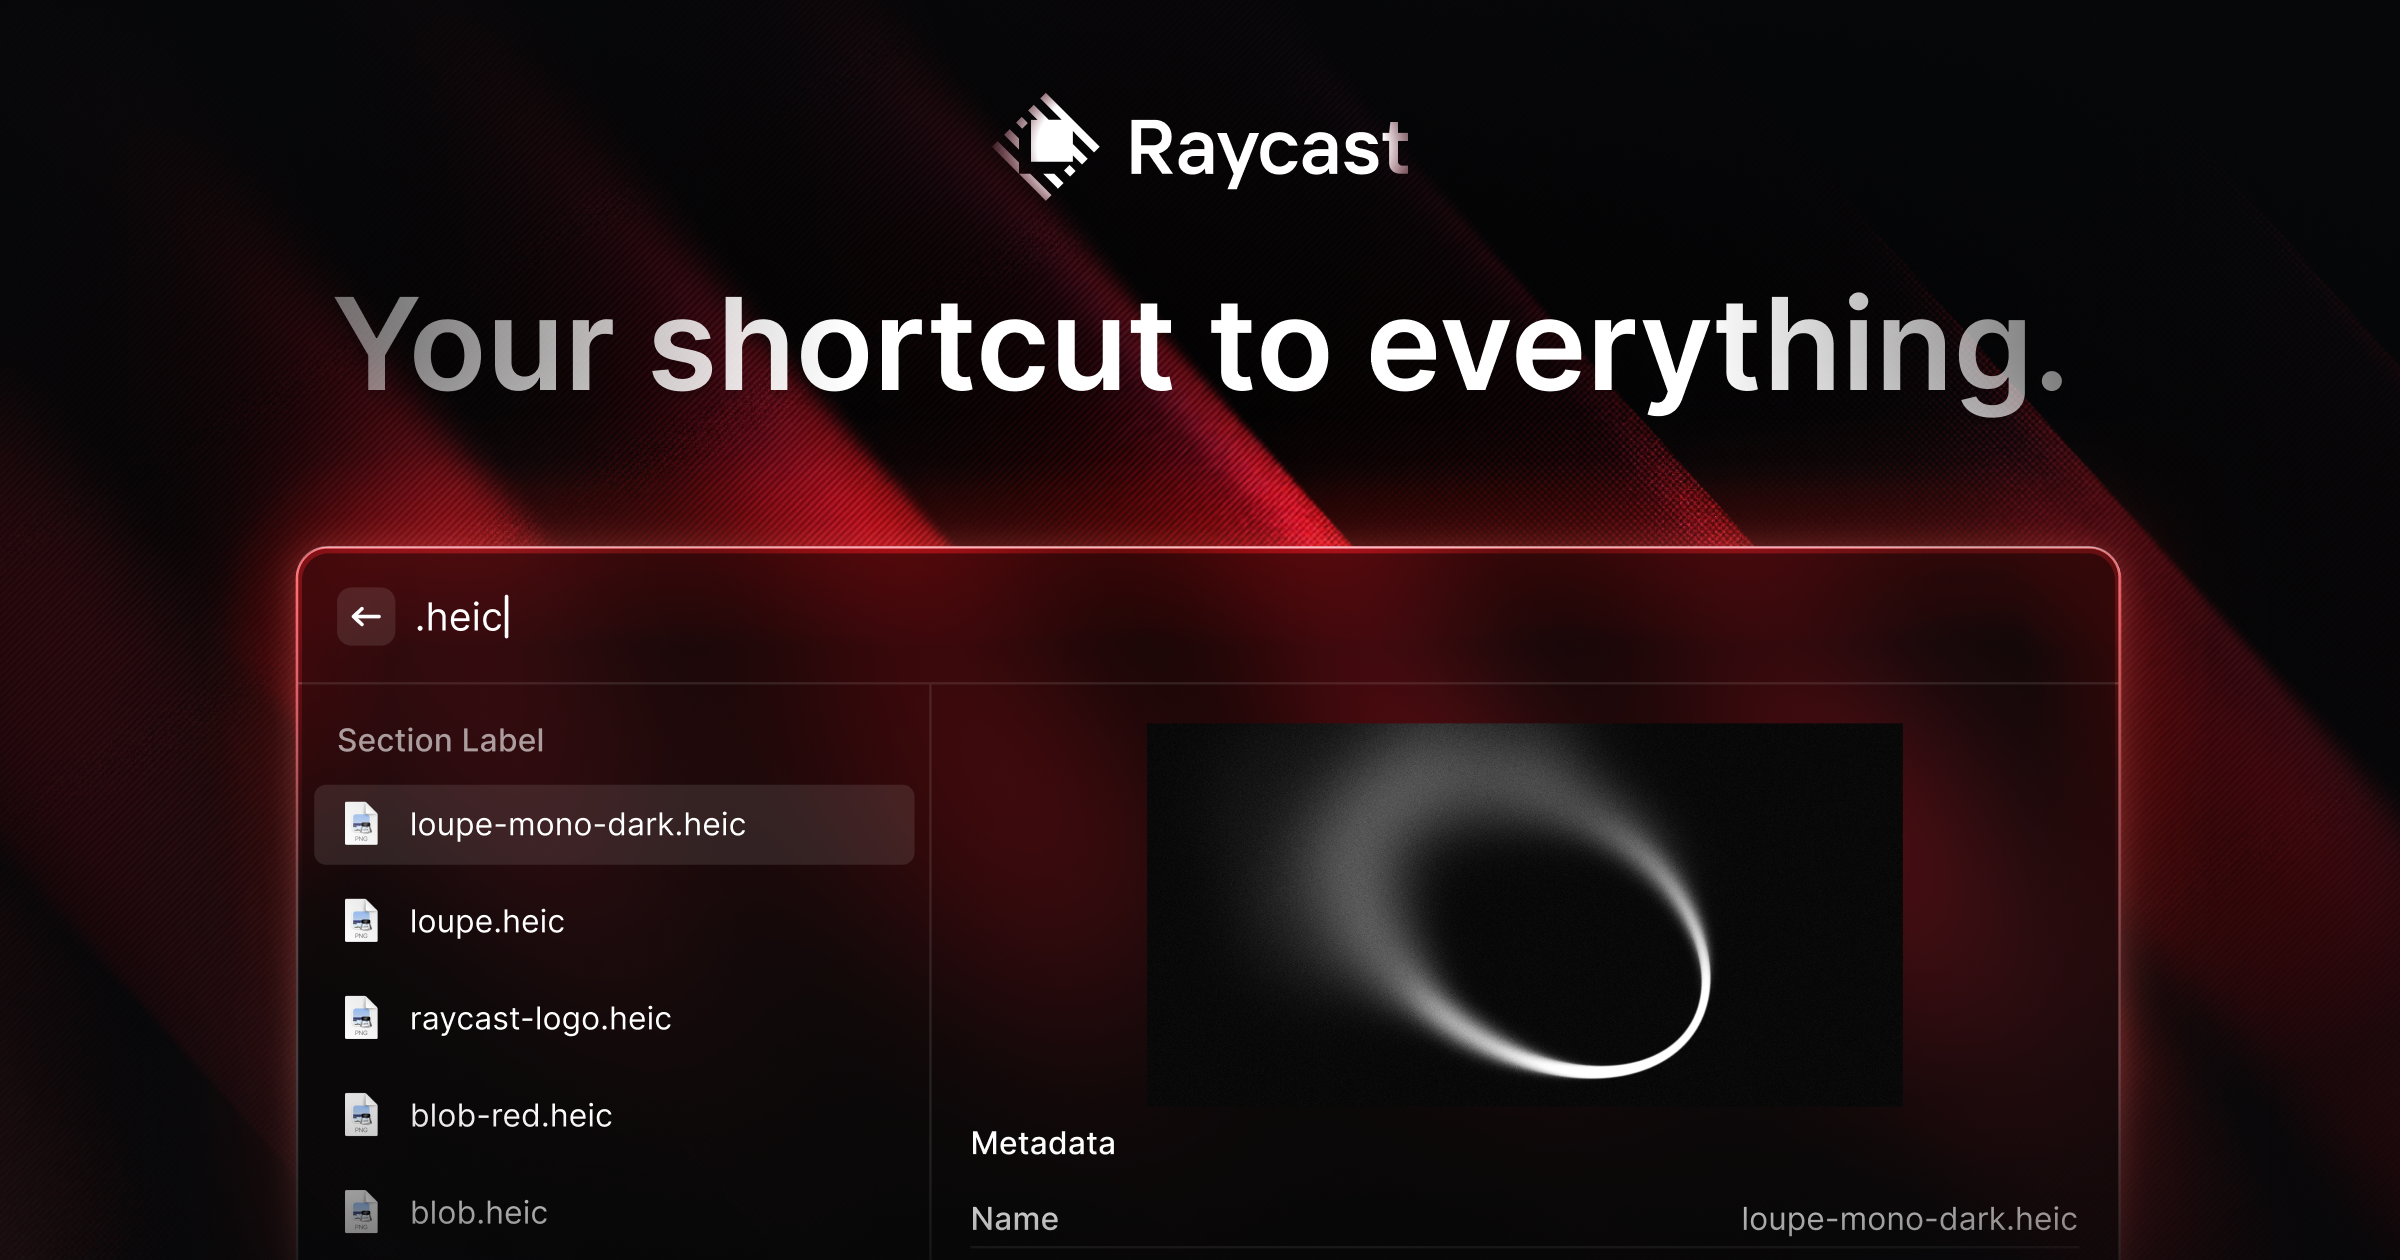 Raycast - Your shortcut to everything